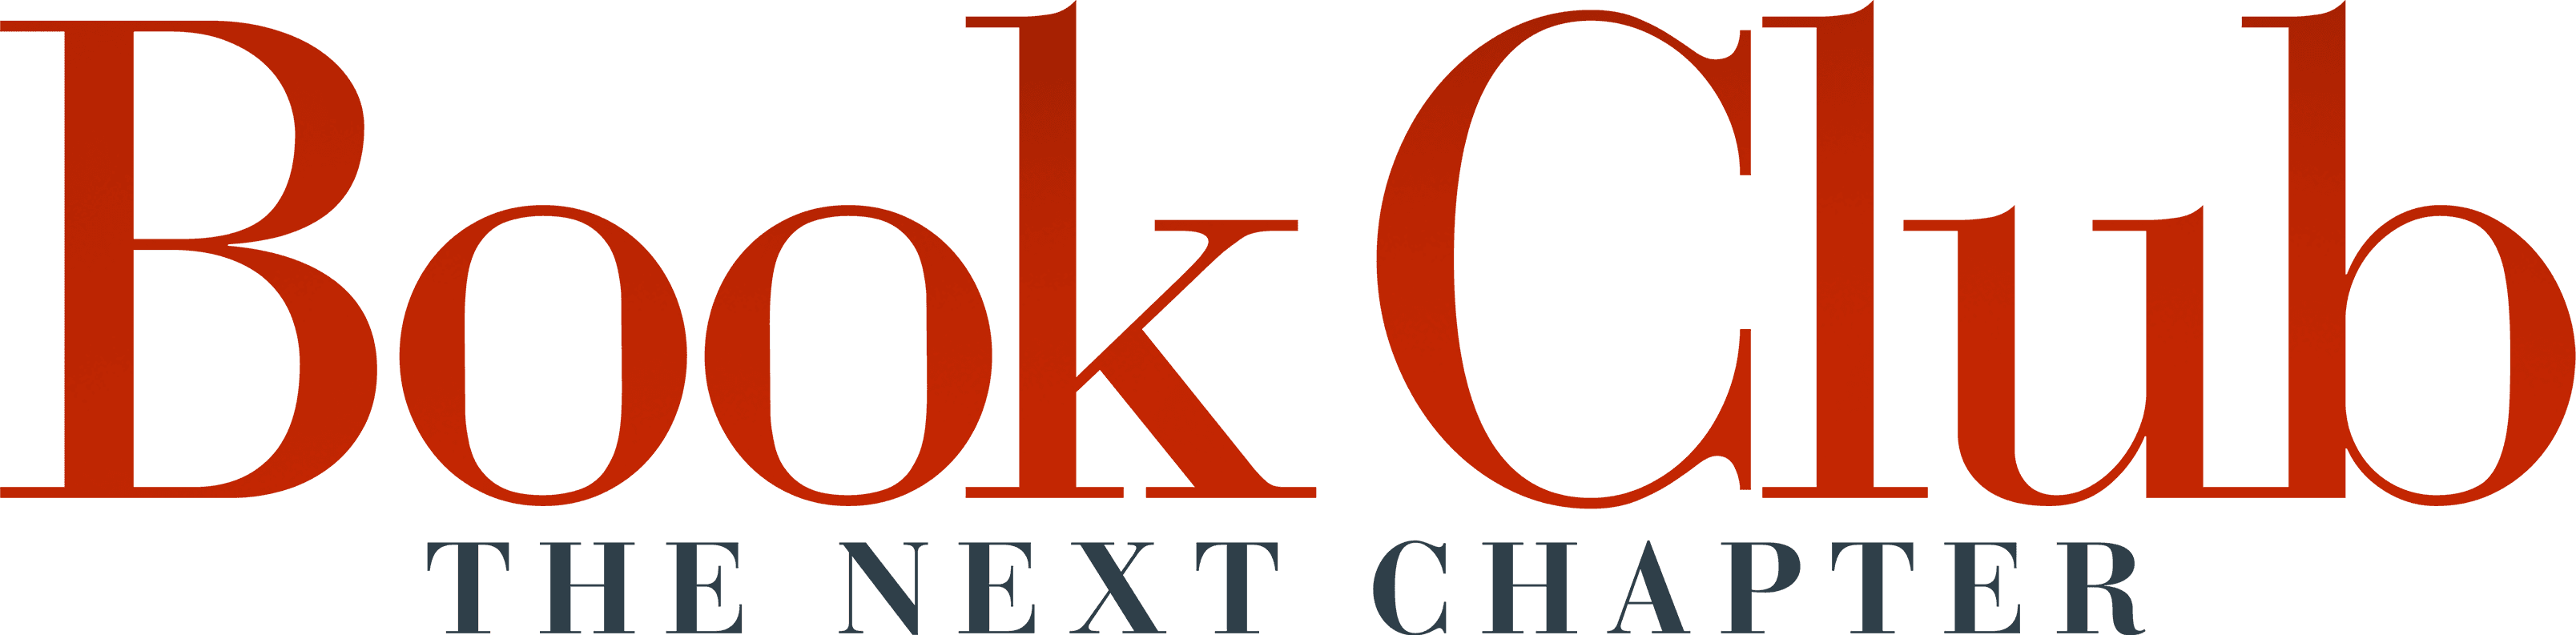 Book Club: The Next Chapter logo